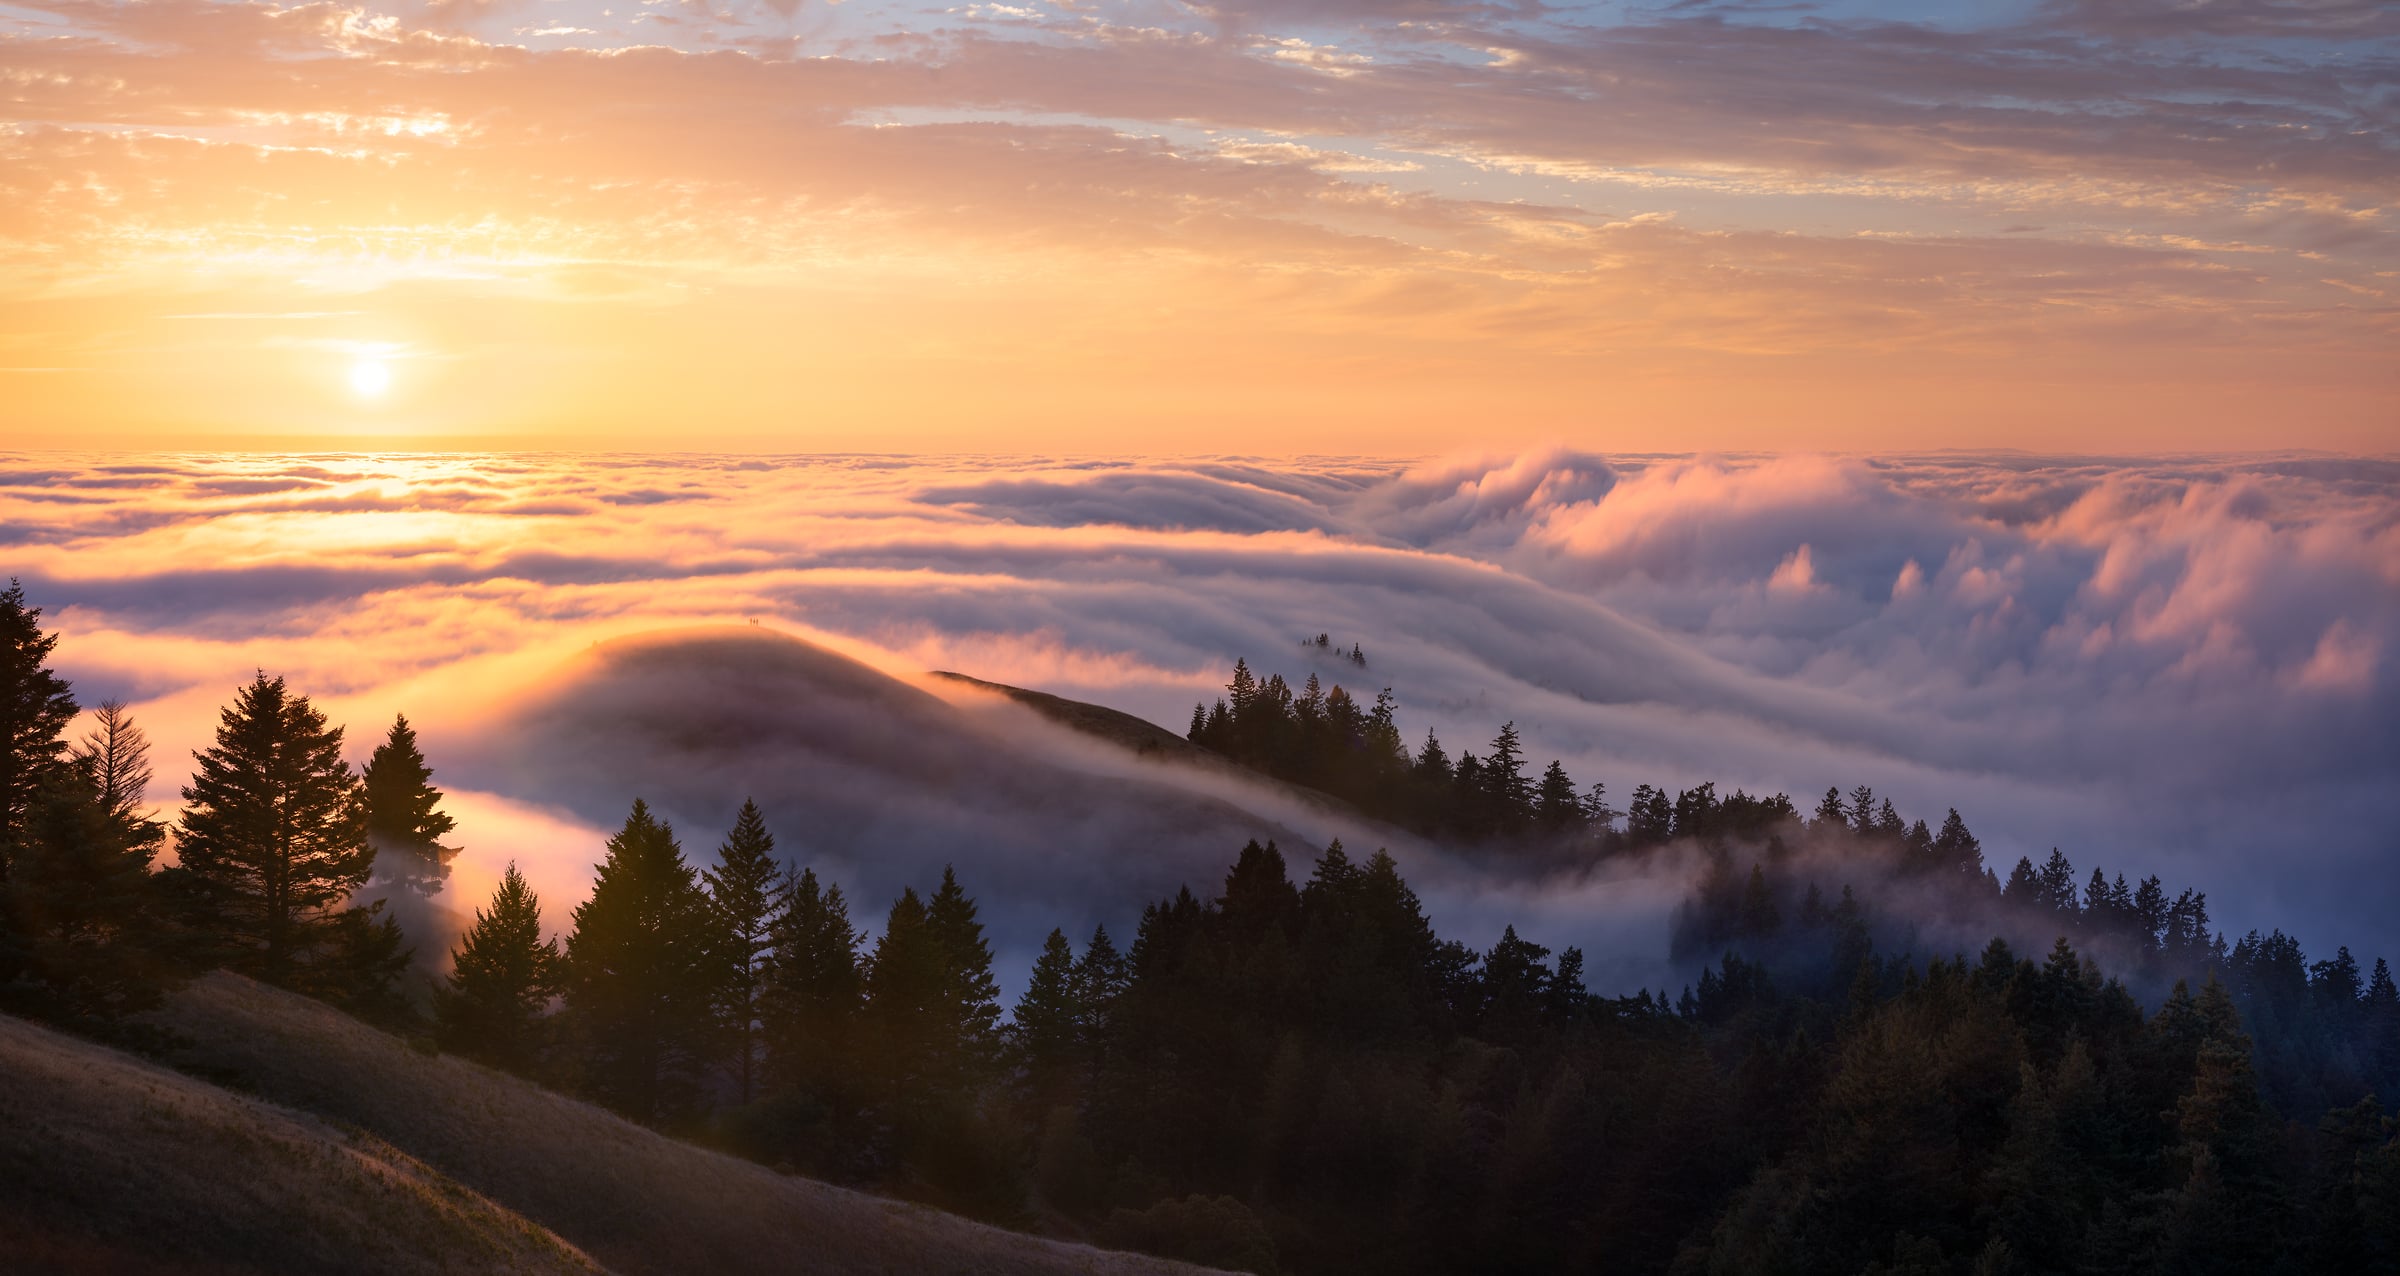 214 megapixels! A very high resolution, large-format VAST photo print of a sunset scene above clouds on top of a mountain; landscape photograph created by Jeff Lewis in Mt. Tamalpais, Marin County, California